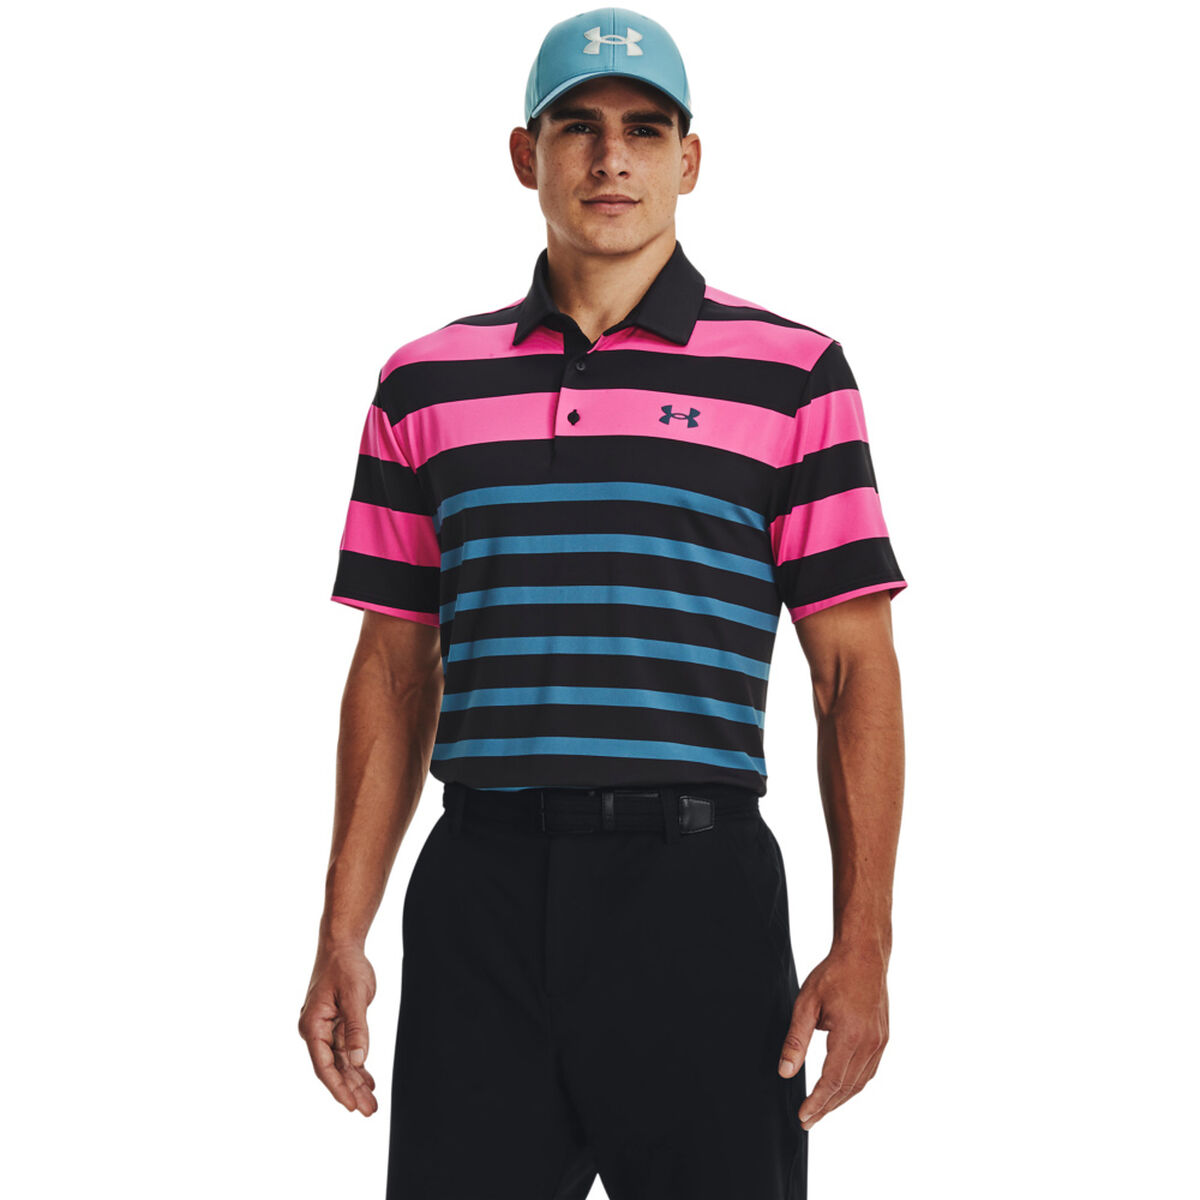 Under Armour Men’s Playoff 3.0 Rugby YD Stripe Golf Polo Shirt, Mens, Black/pink/blue, Large | American Golf